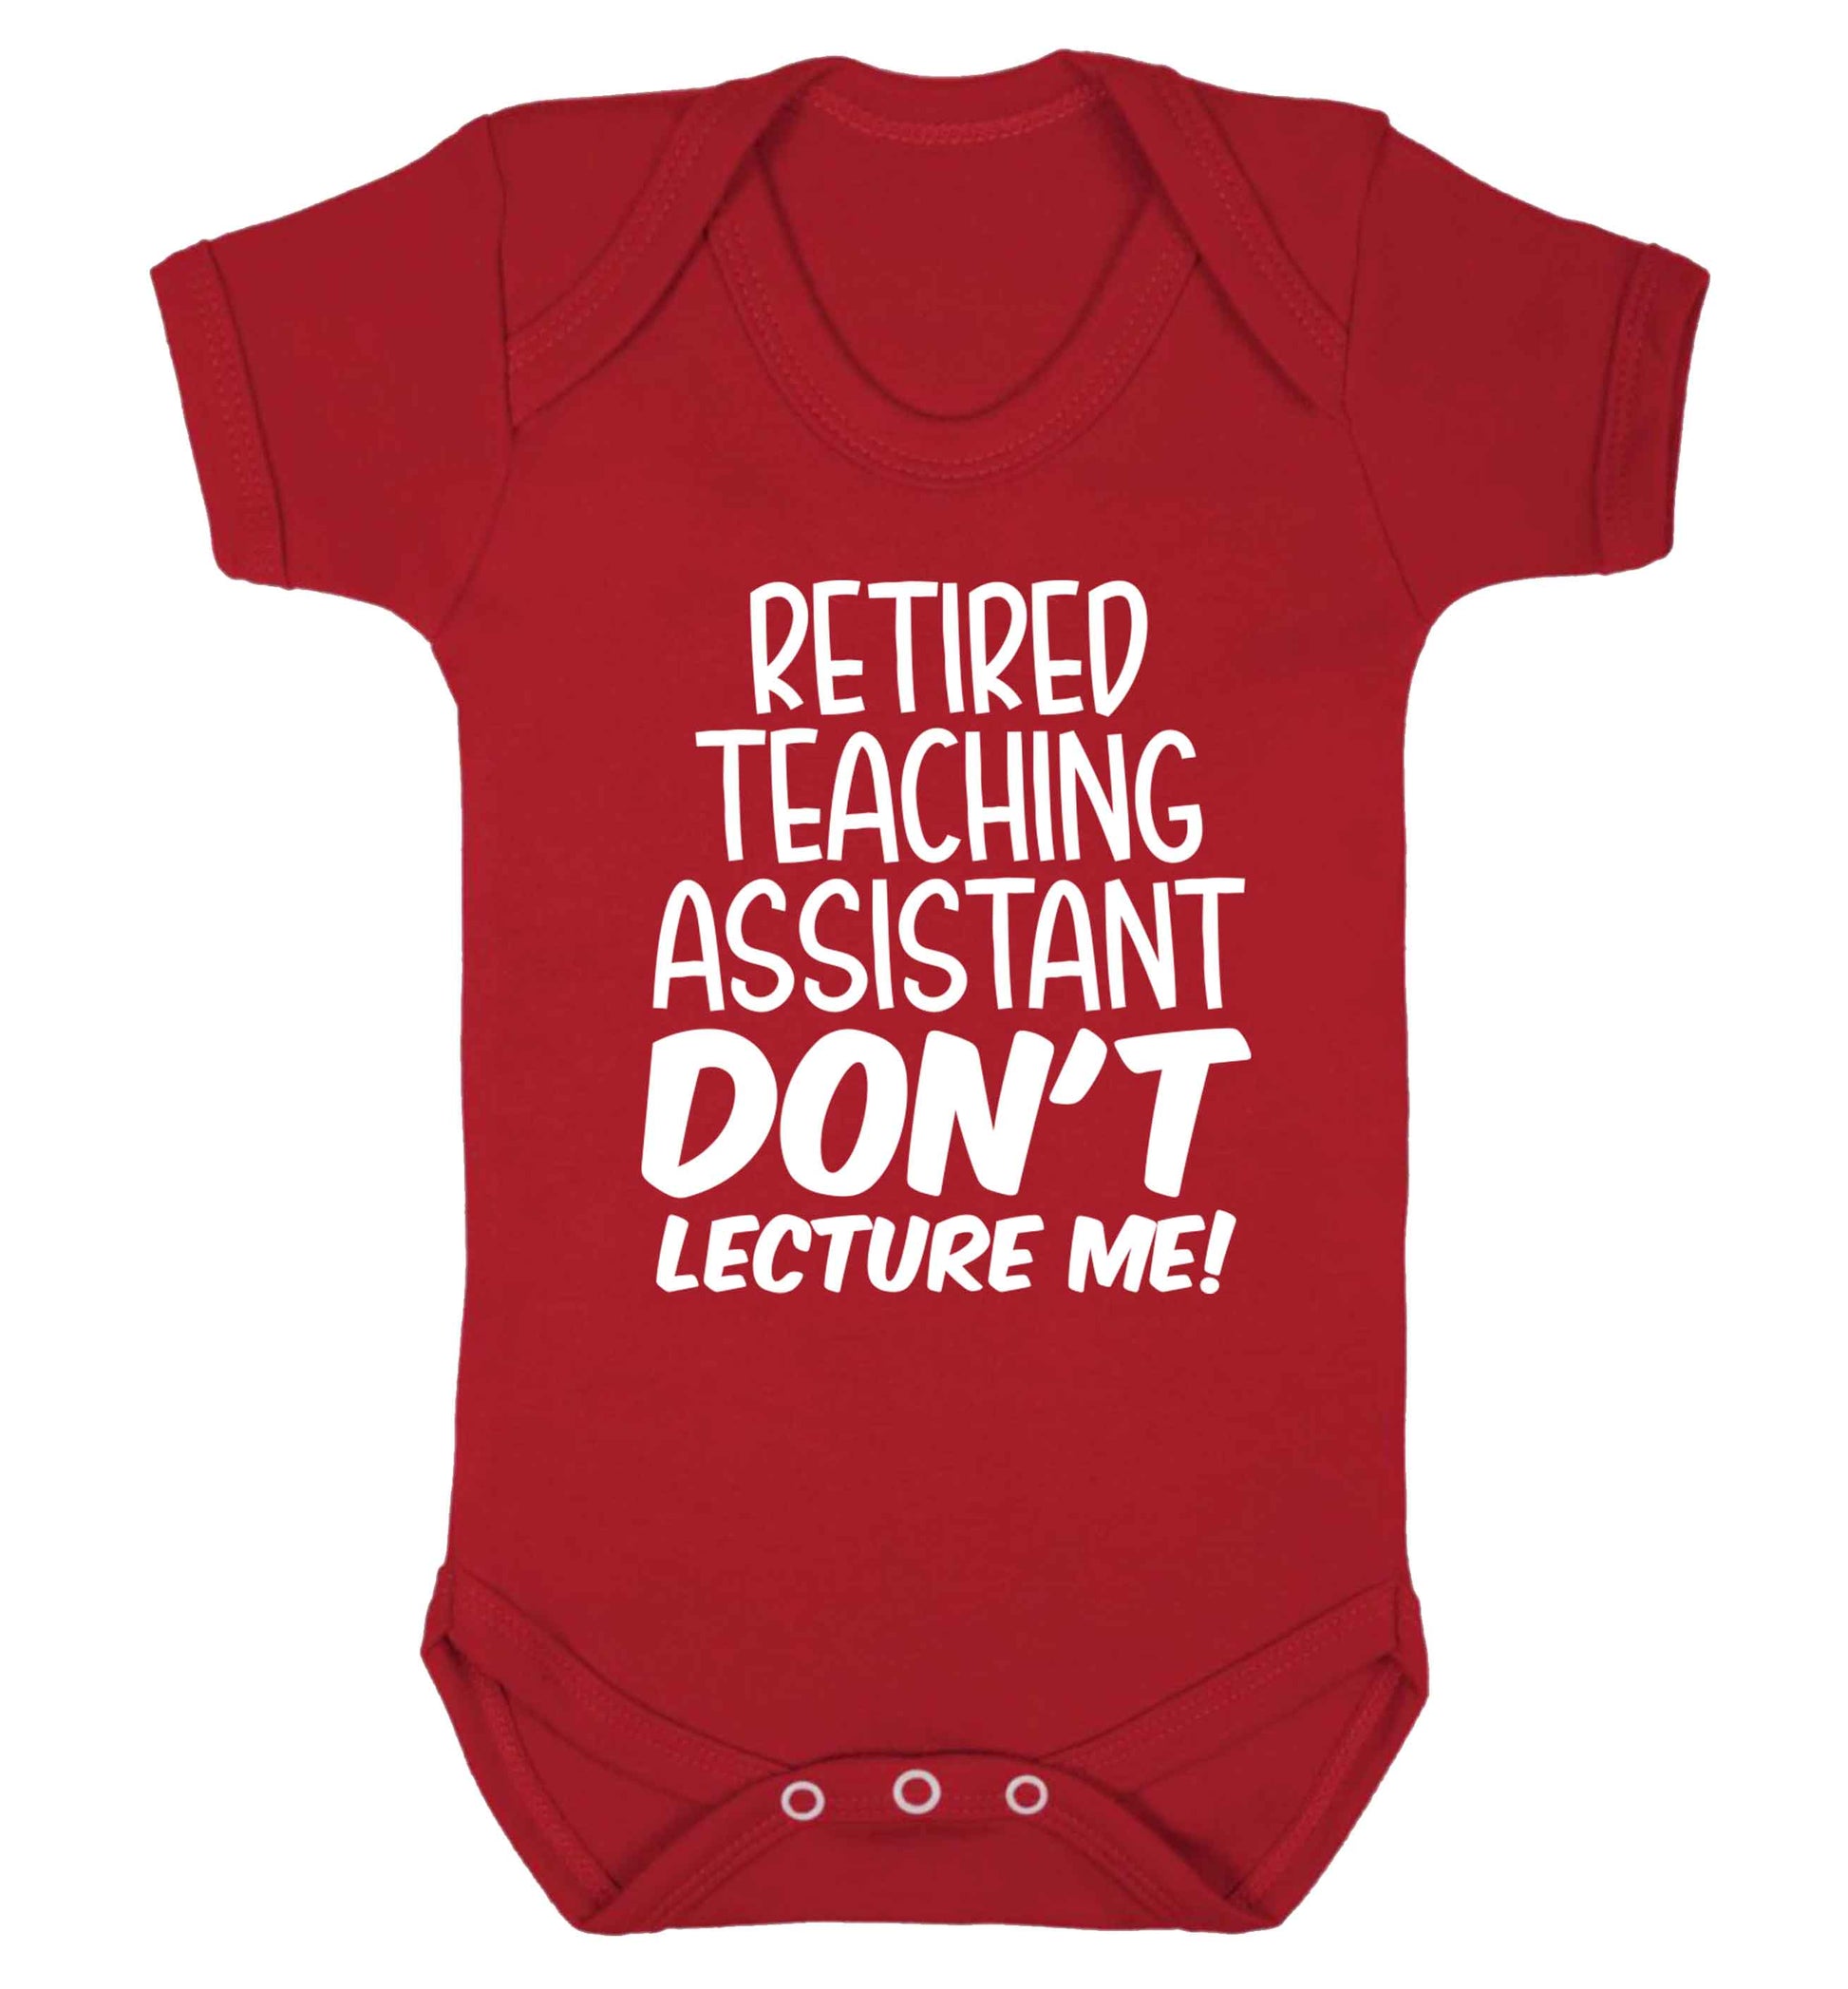 Retired teaching assistant don't lecture me Baby Vest red 18-24 months